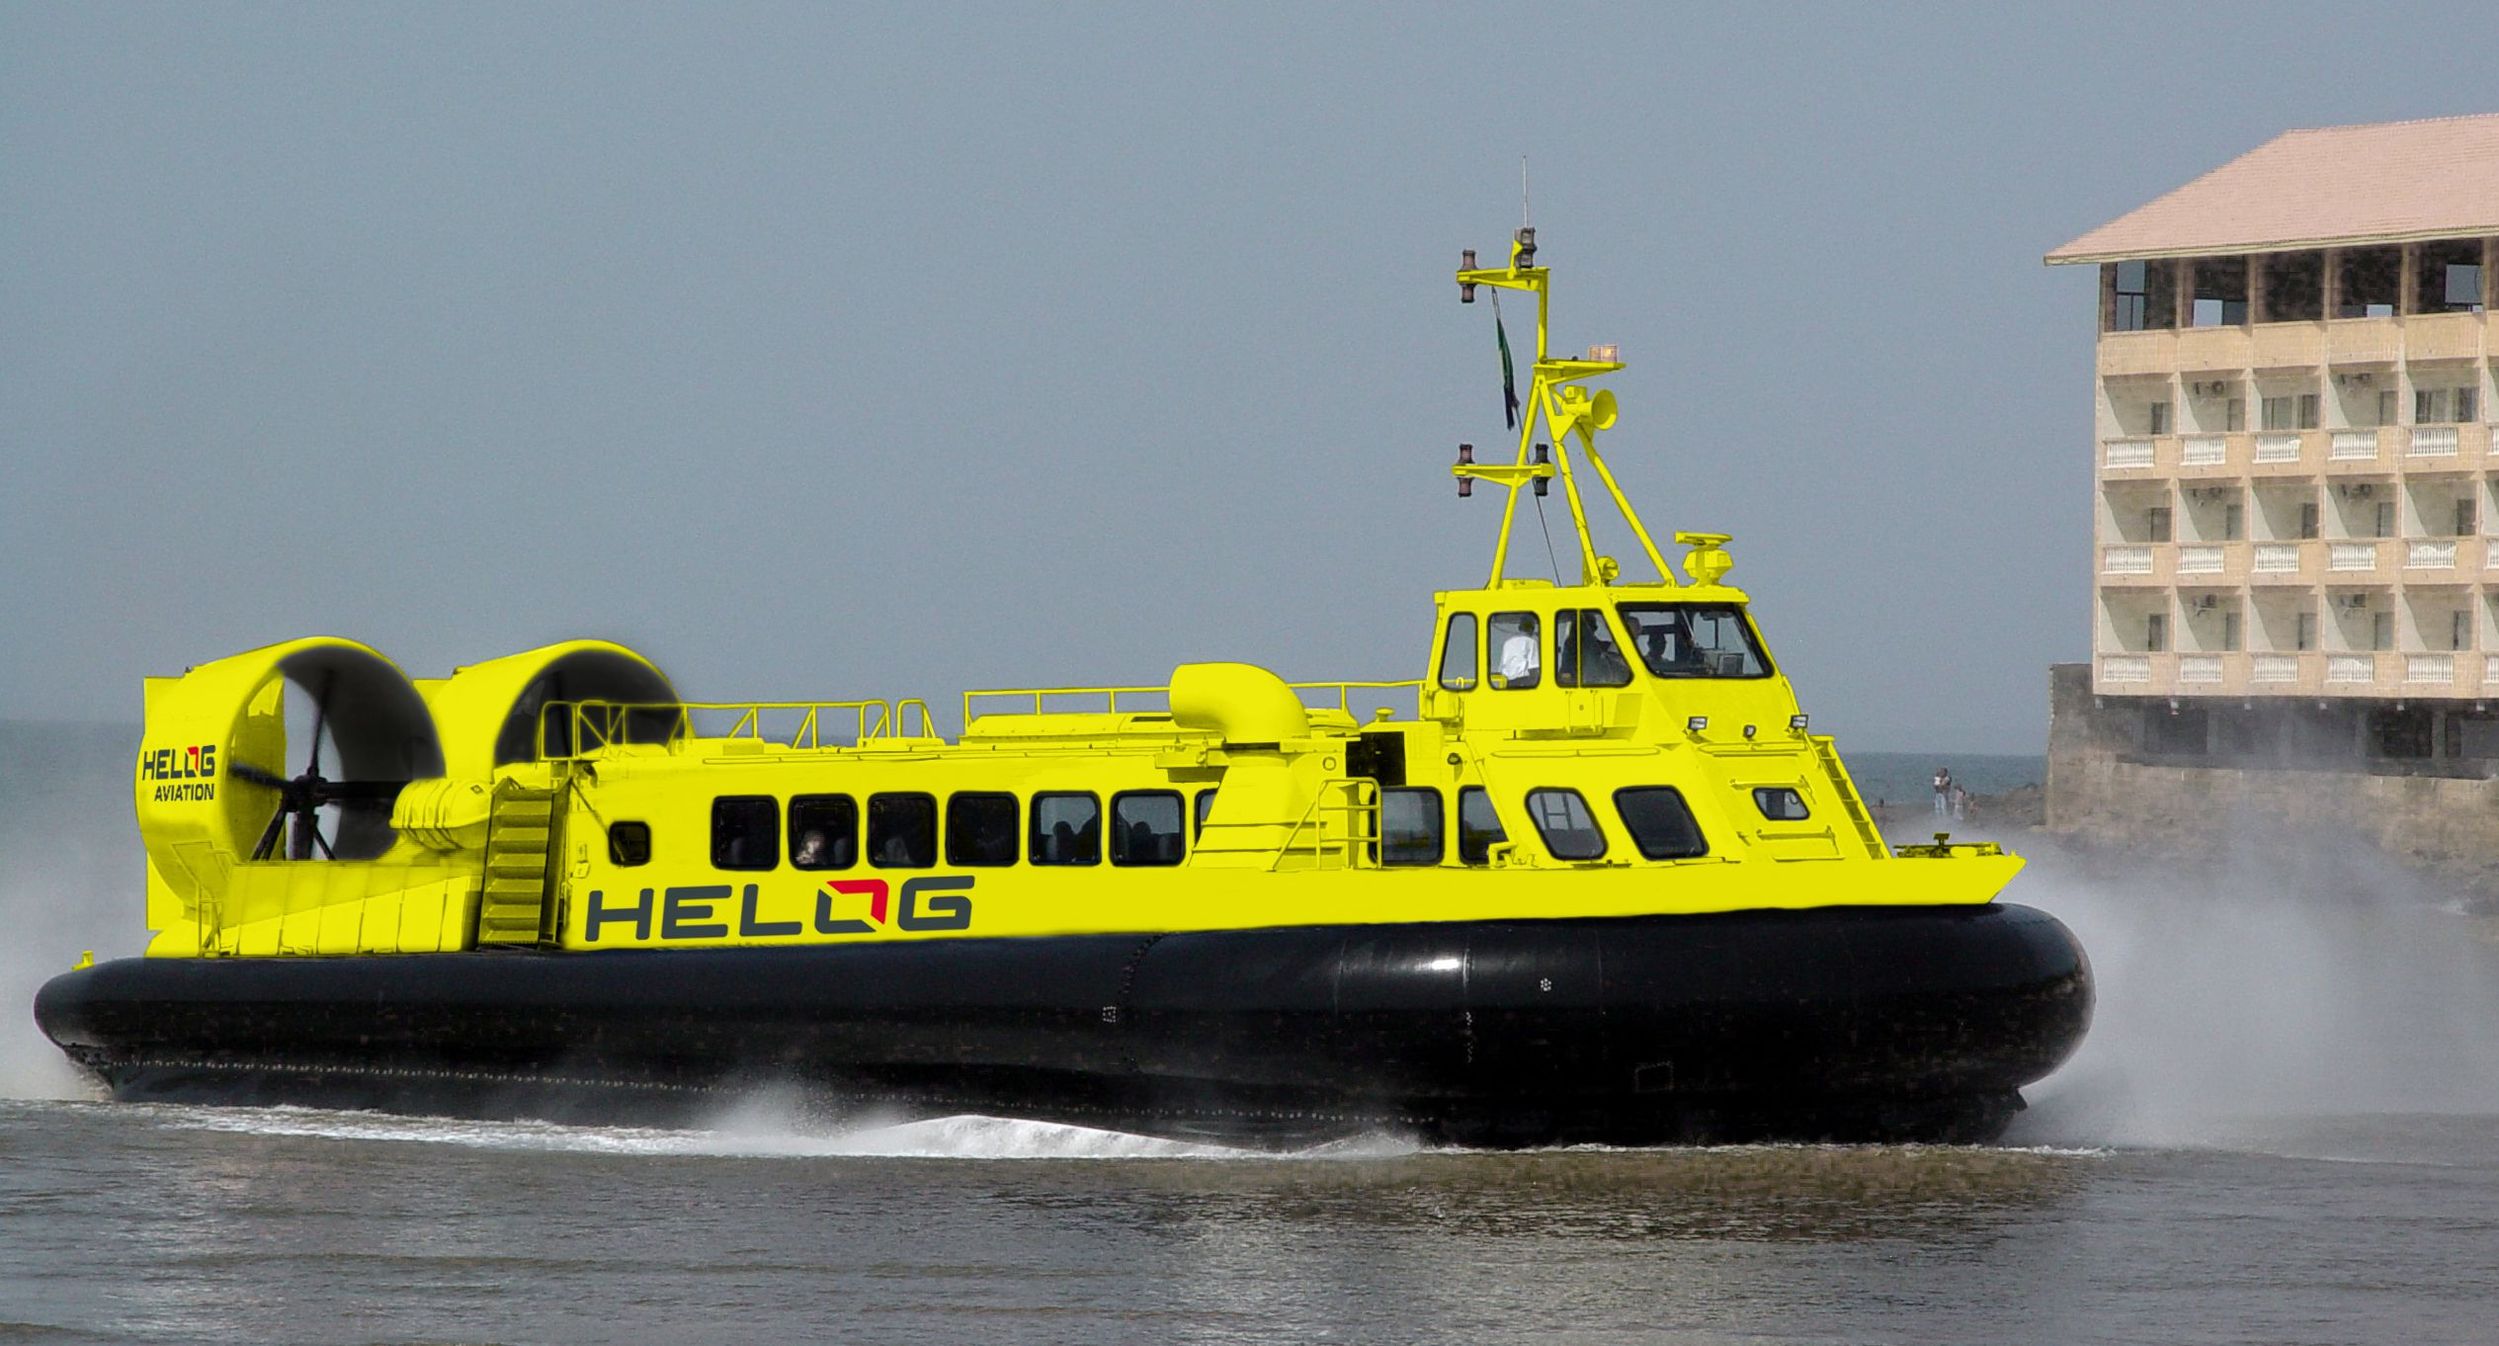 World’s Largest Hovercrafts Hitting Speeds Up To 95 MPH